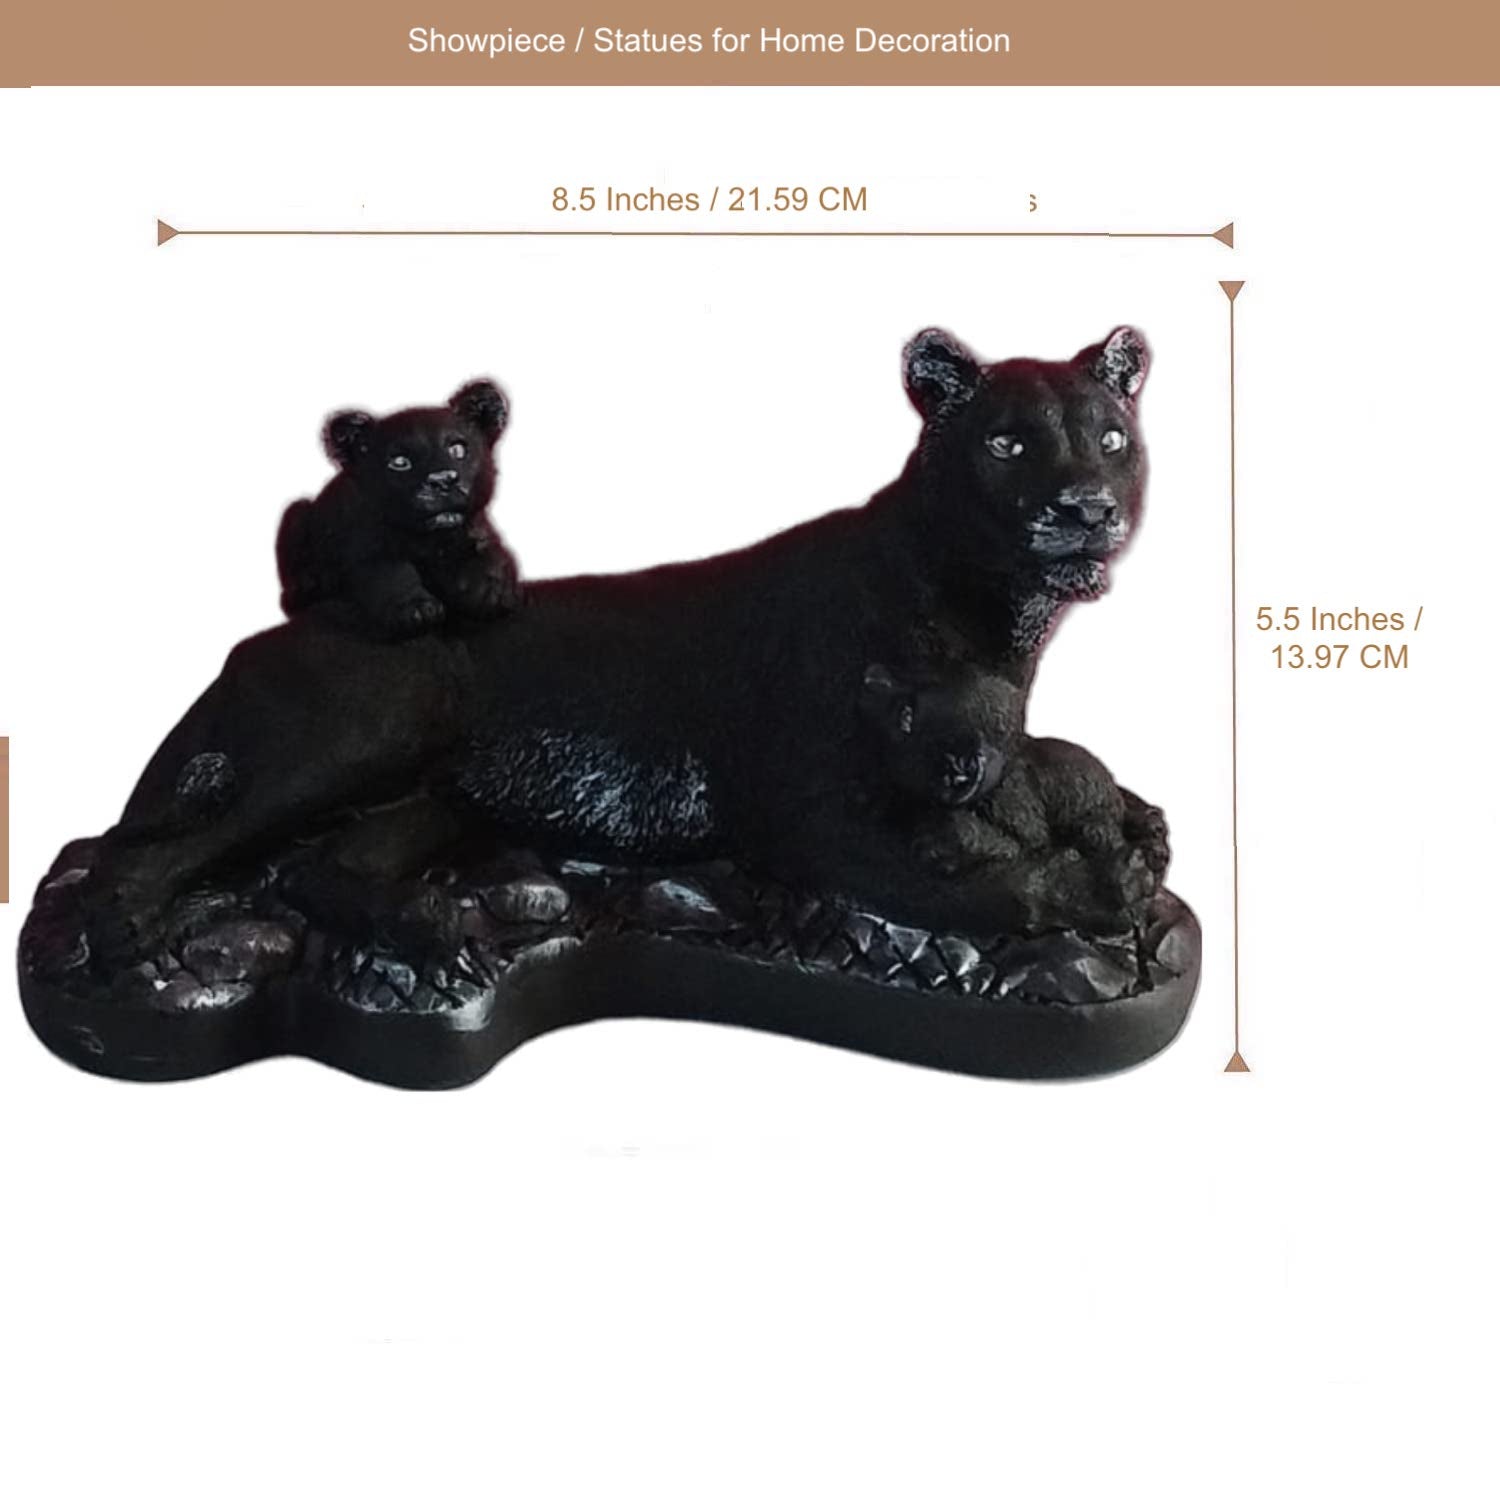 Statue ALiLA Black Lion with Kid Statue Showpiece Idol for Gifting & Home Table Office Desk Decoration, 5.5 Inches Height Statue